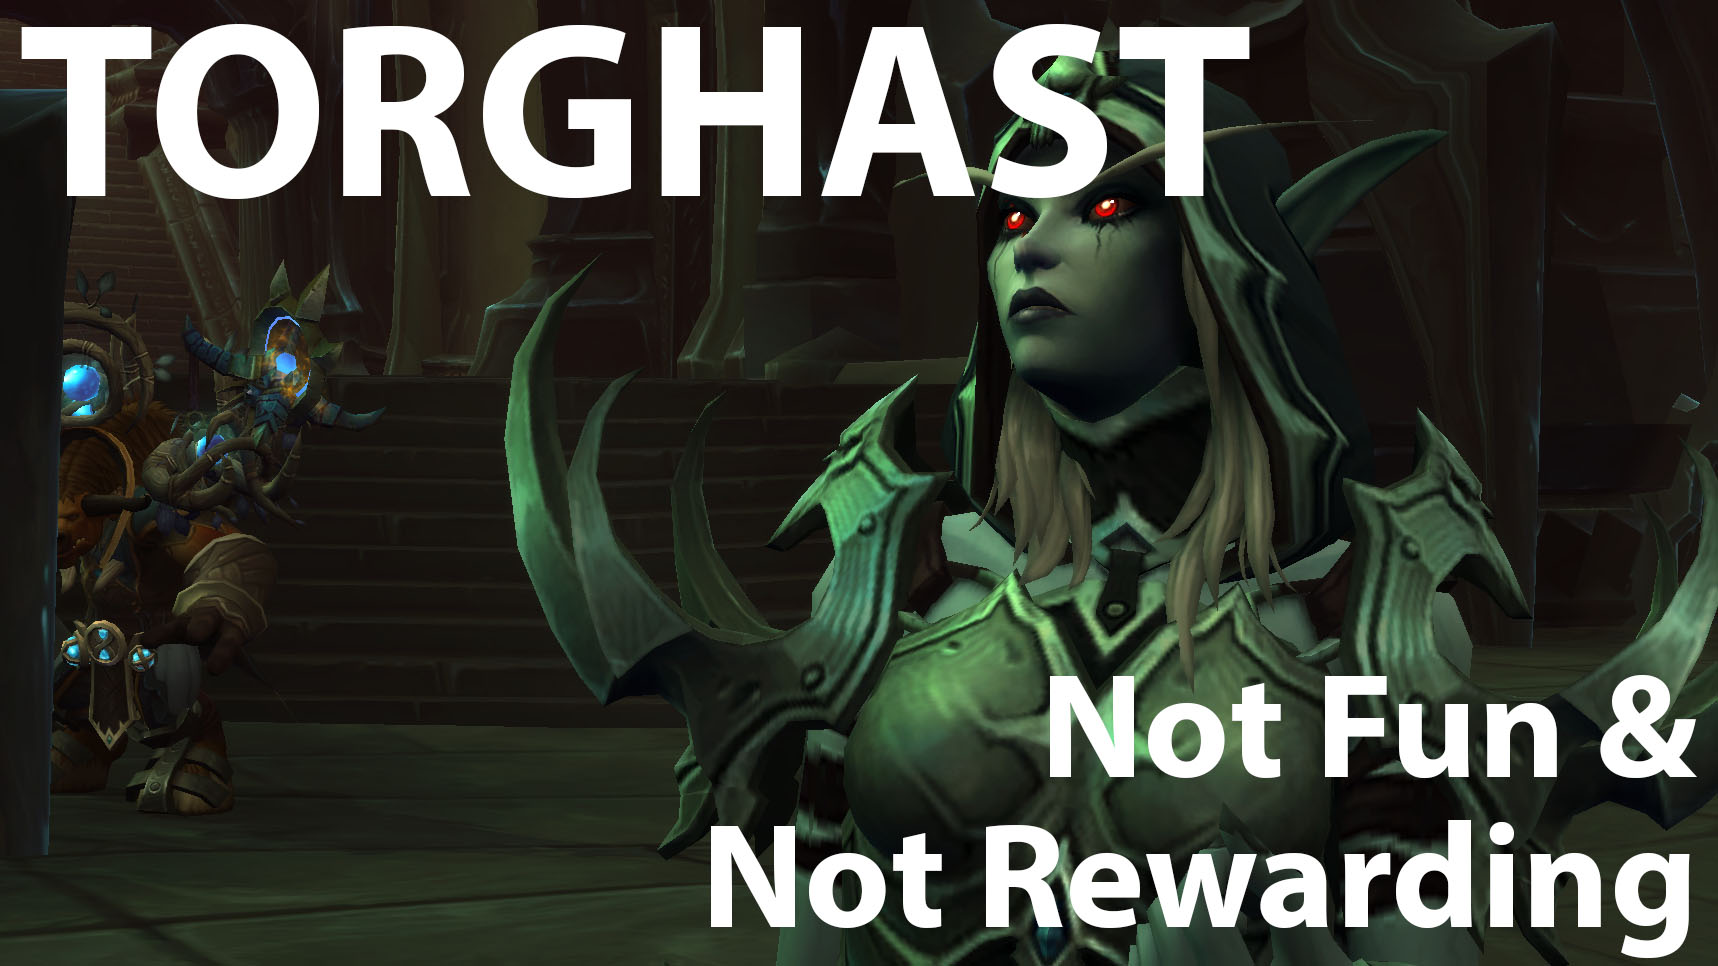 Torghast is Not Fun and Not Rewarding